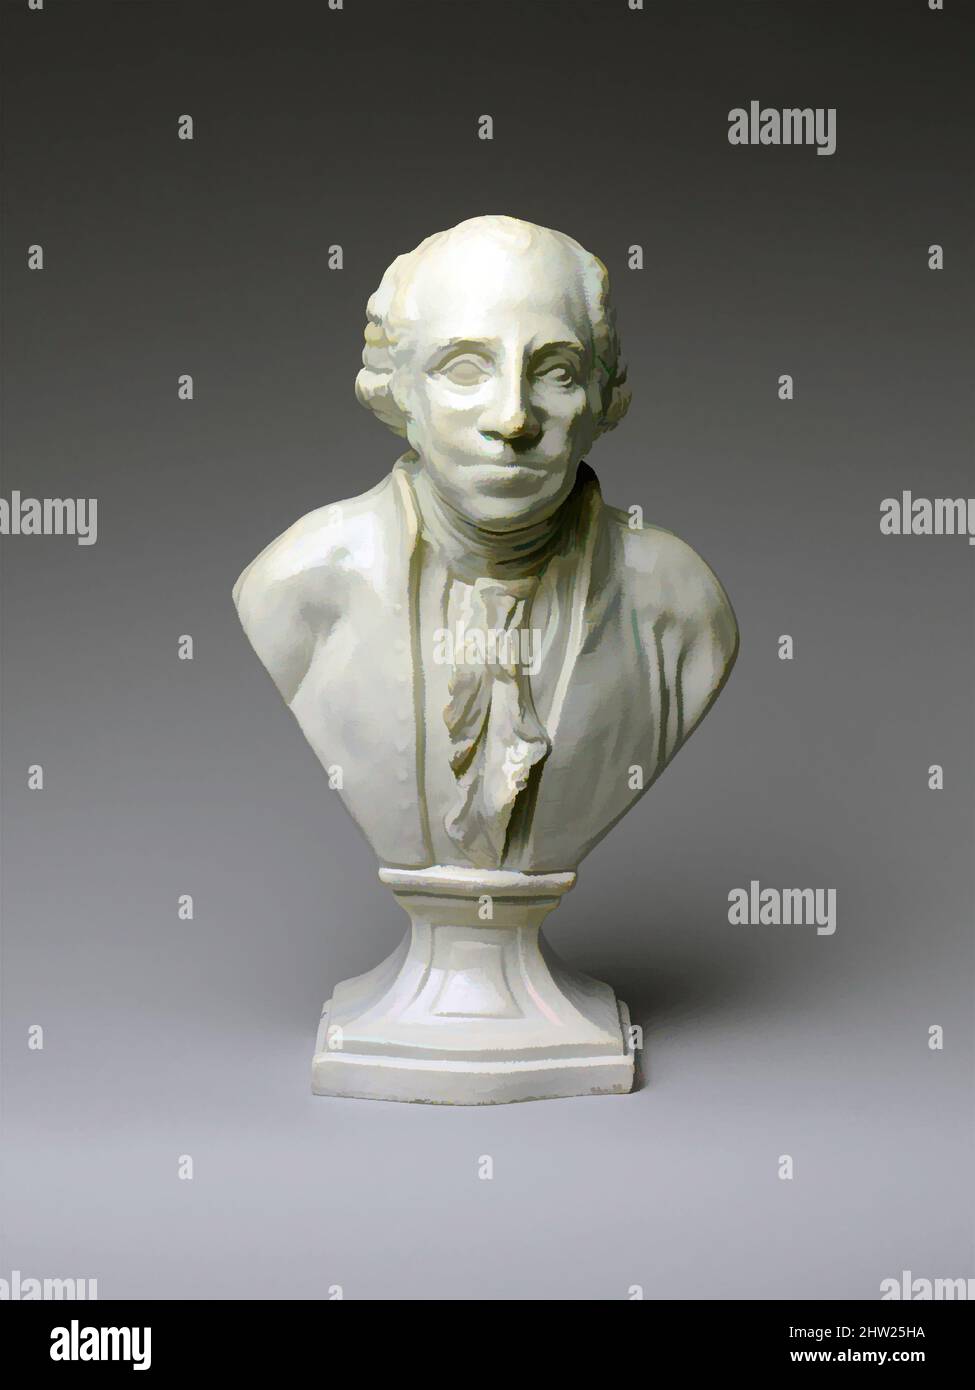 Art inspired by George Washington, 1748–95, Made in Staffordshire, Stoke-on-Trent, England, British (American market), Earthenware, H. 10 in. (25.4 cm), Ceramics, Ralph Wood the Younger (British, Burslem 1748–1795 Burslem, Classic works modernized by Artotop with a splash of modernity. Shapes, color and value, eye-catching visual impact on art. Emotions through freedom of artworks in a contemporary way. A timeless message pursuing a wildly creative new direction. Artists turning to the digital medium and creating the Artotop NFT Stock Photo